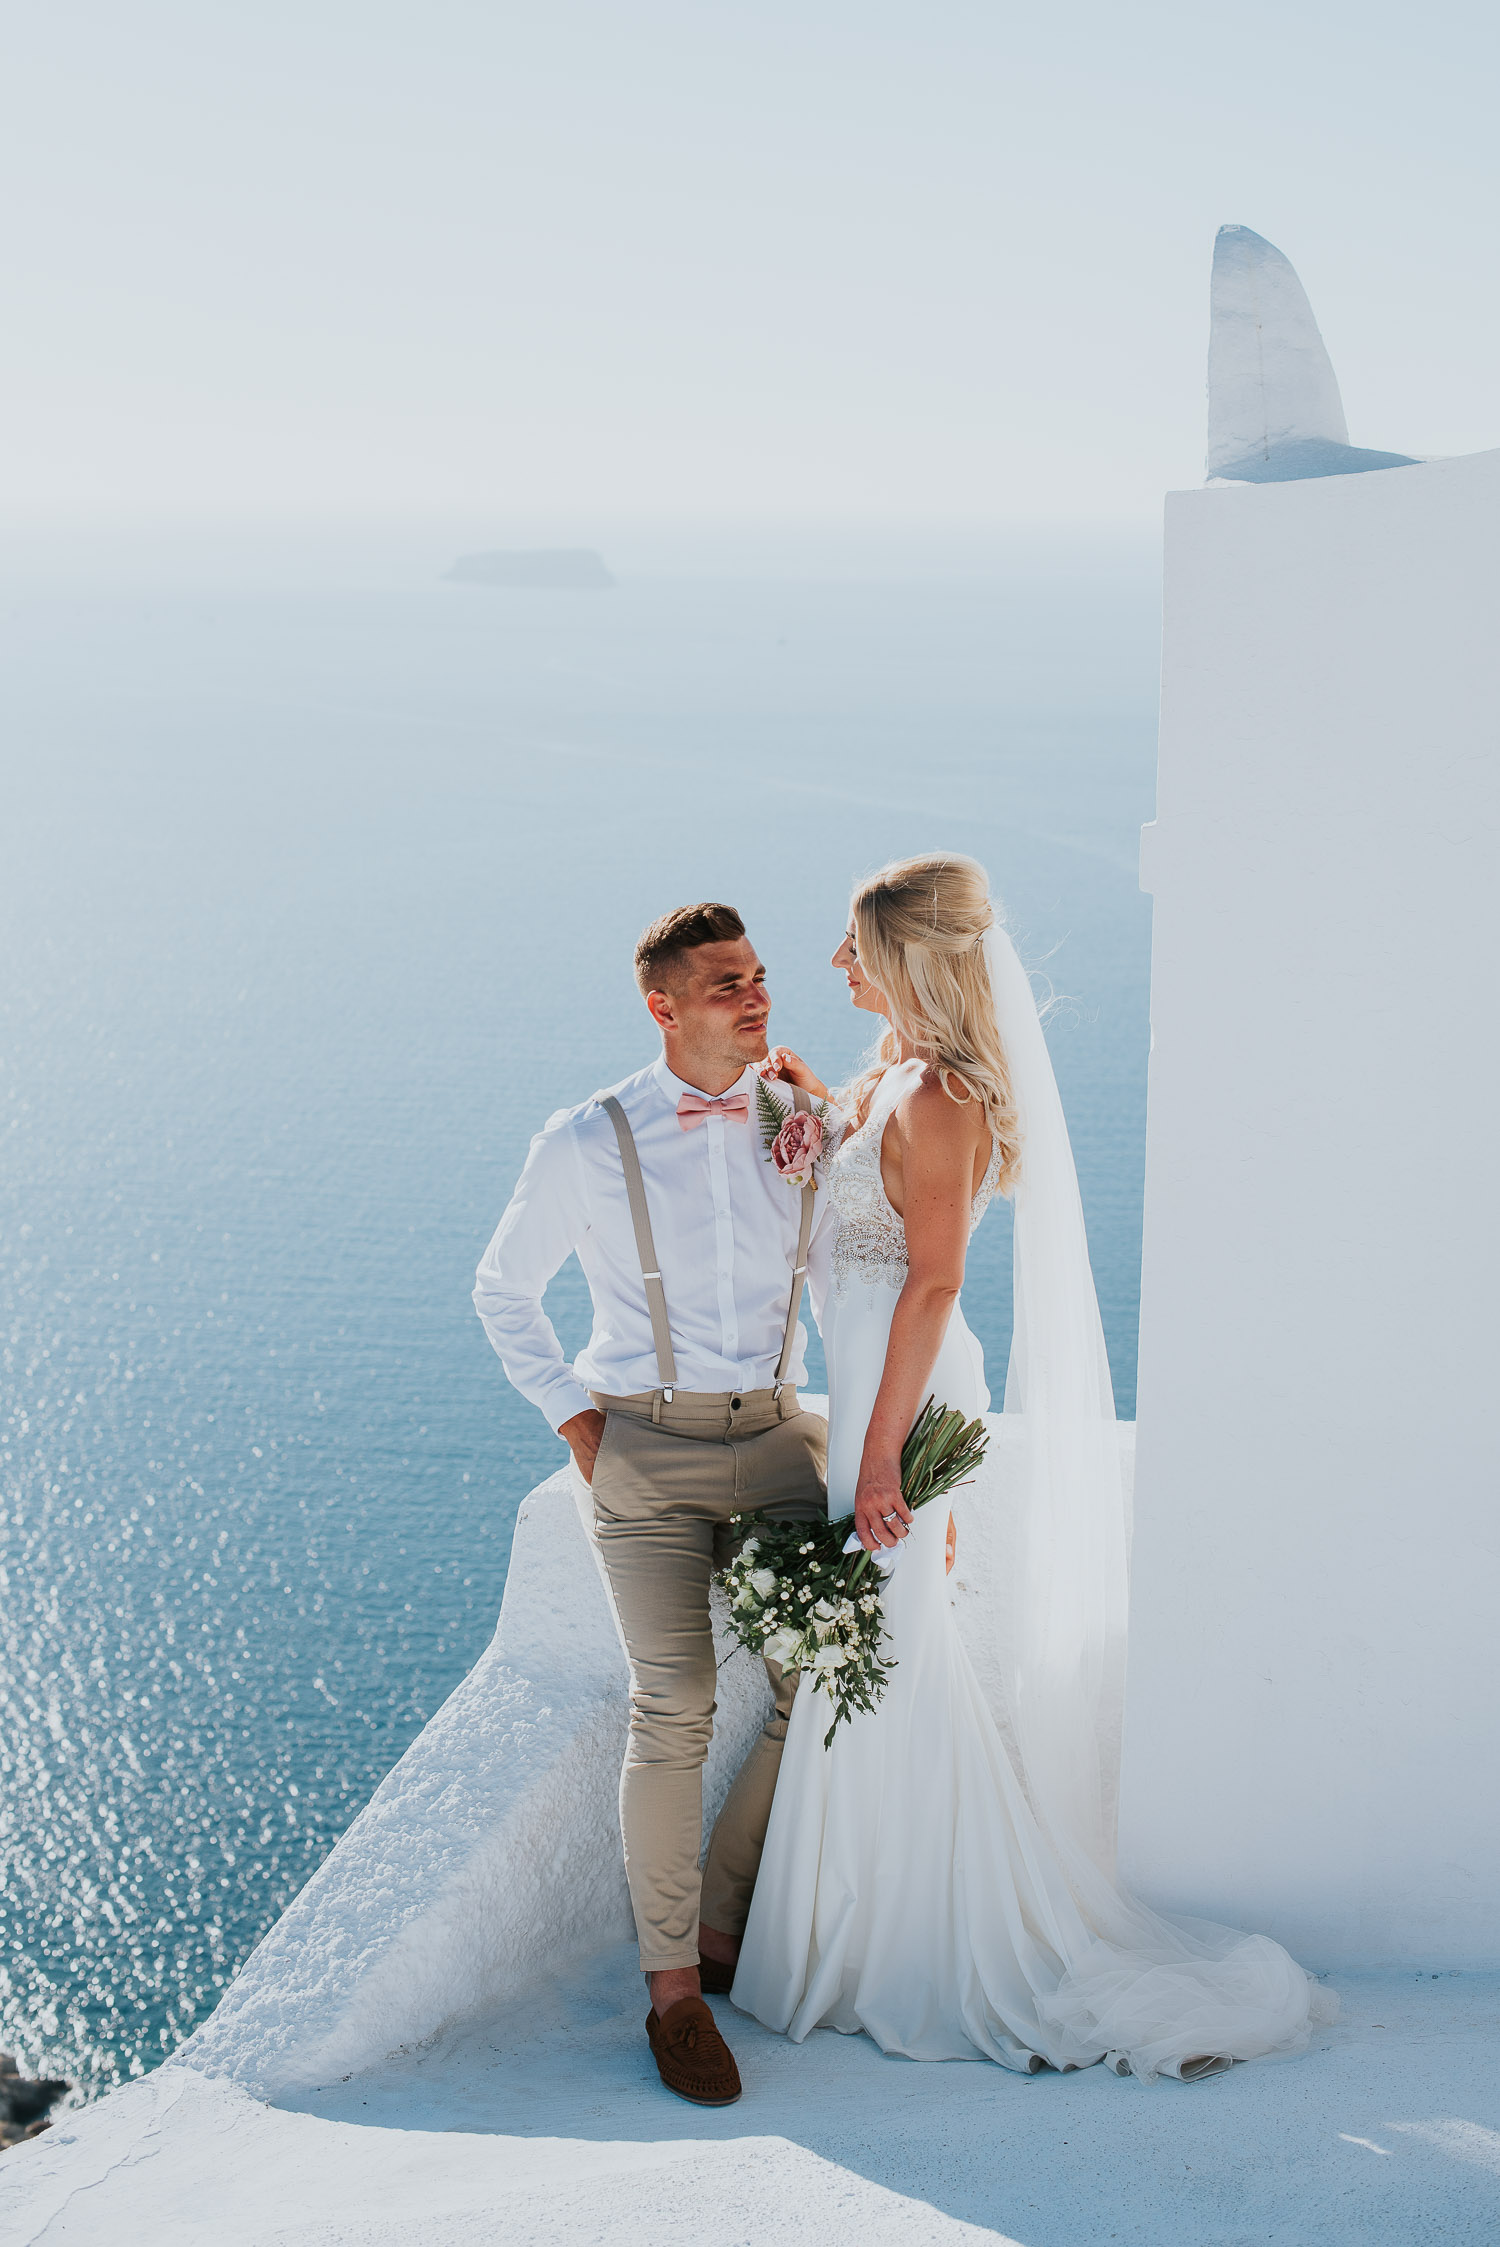 Wedding photographer Santorini: groom and bride next to the bell tower basked in the afternoon light by Ben and Vesna.